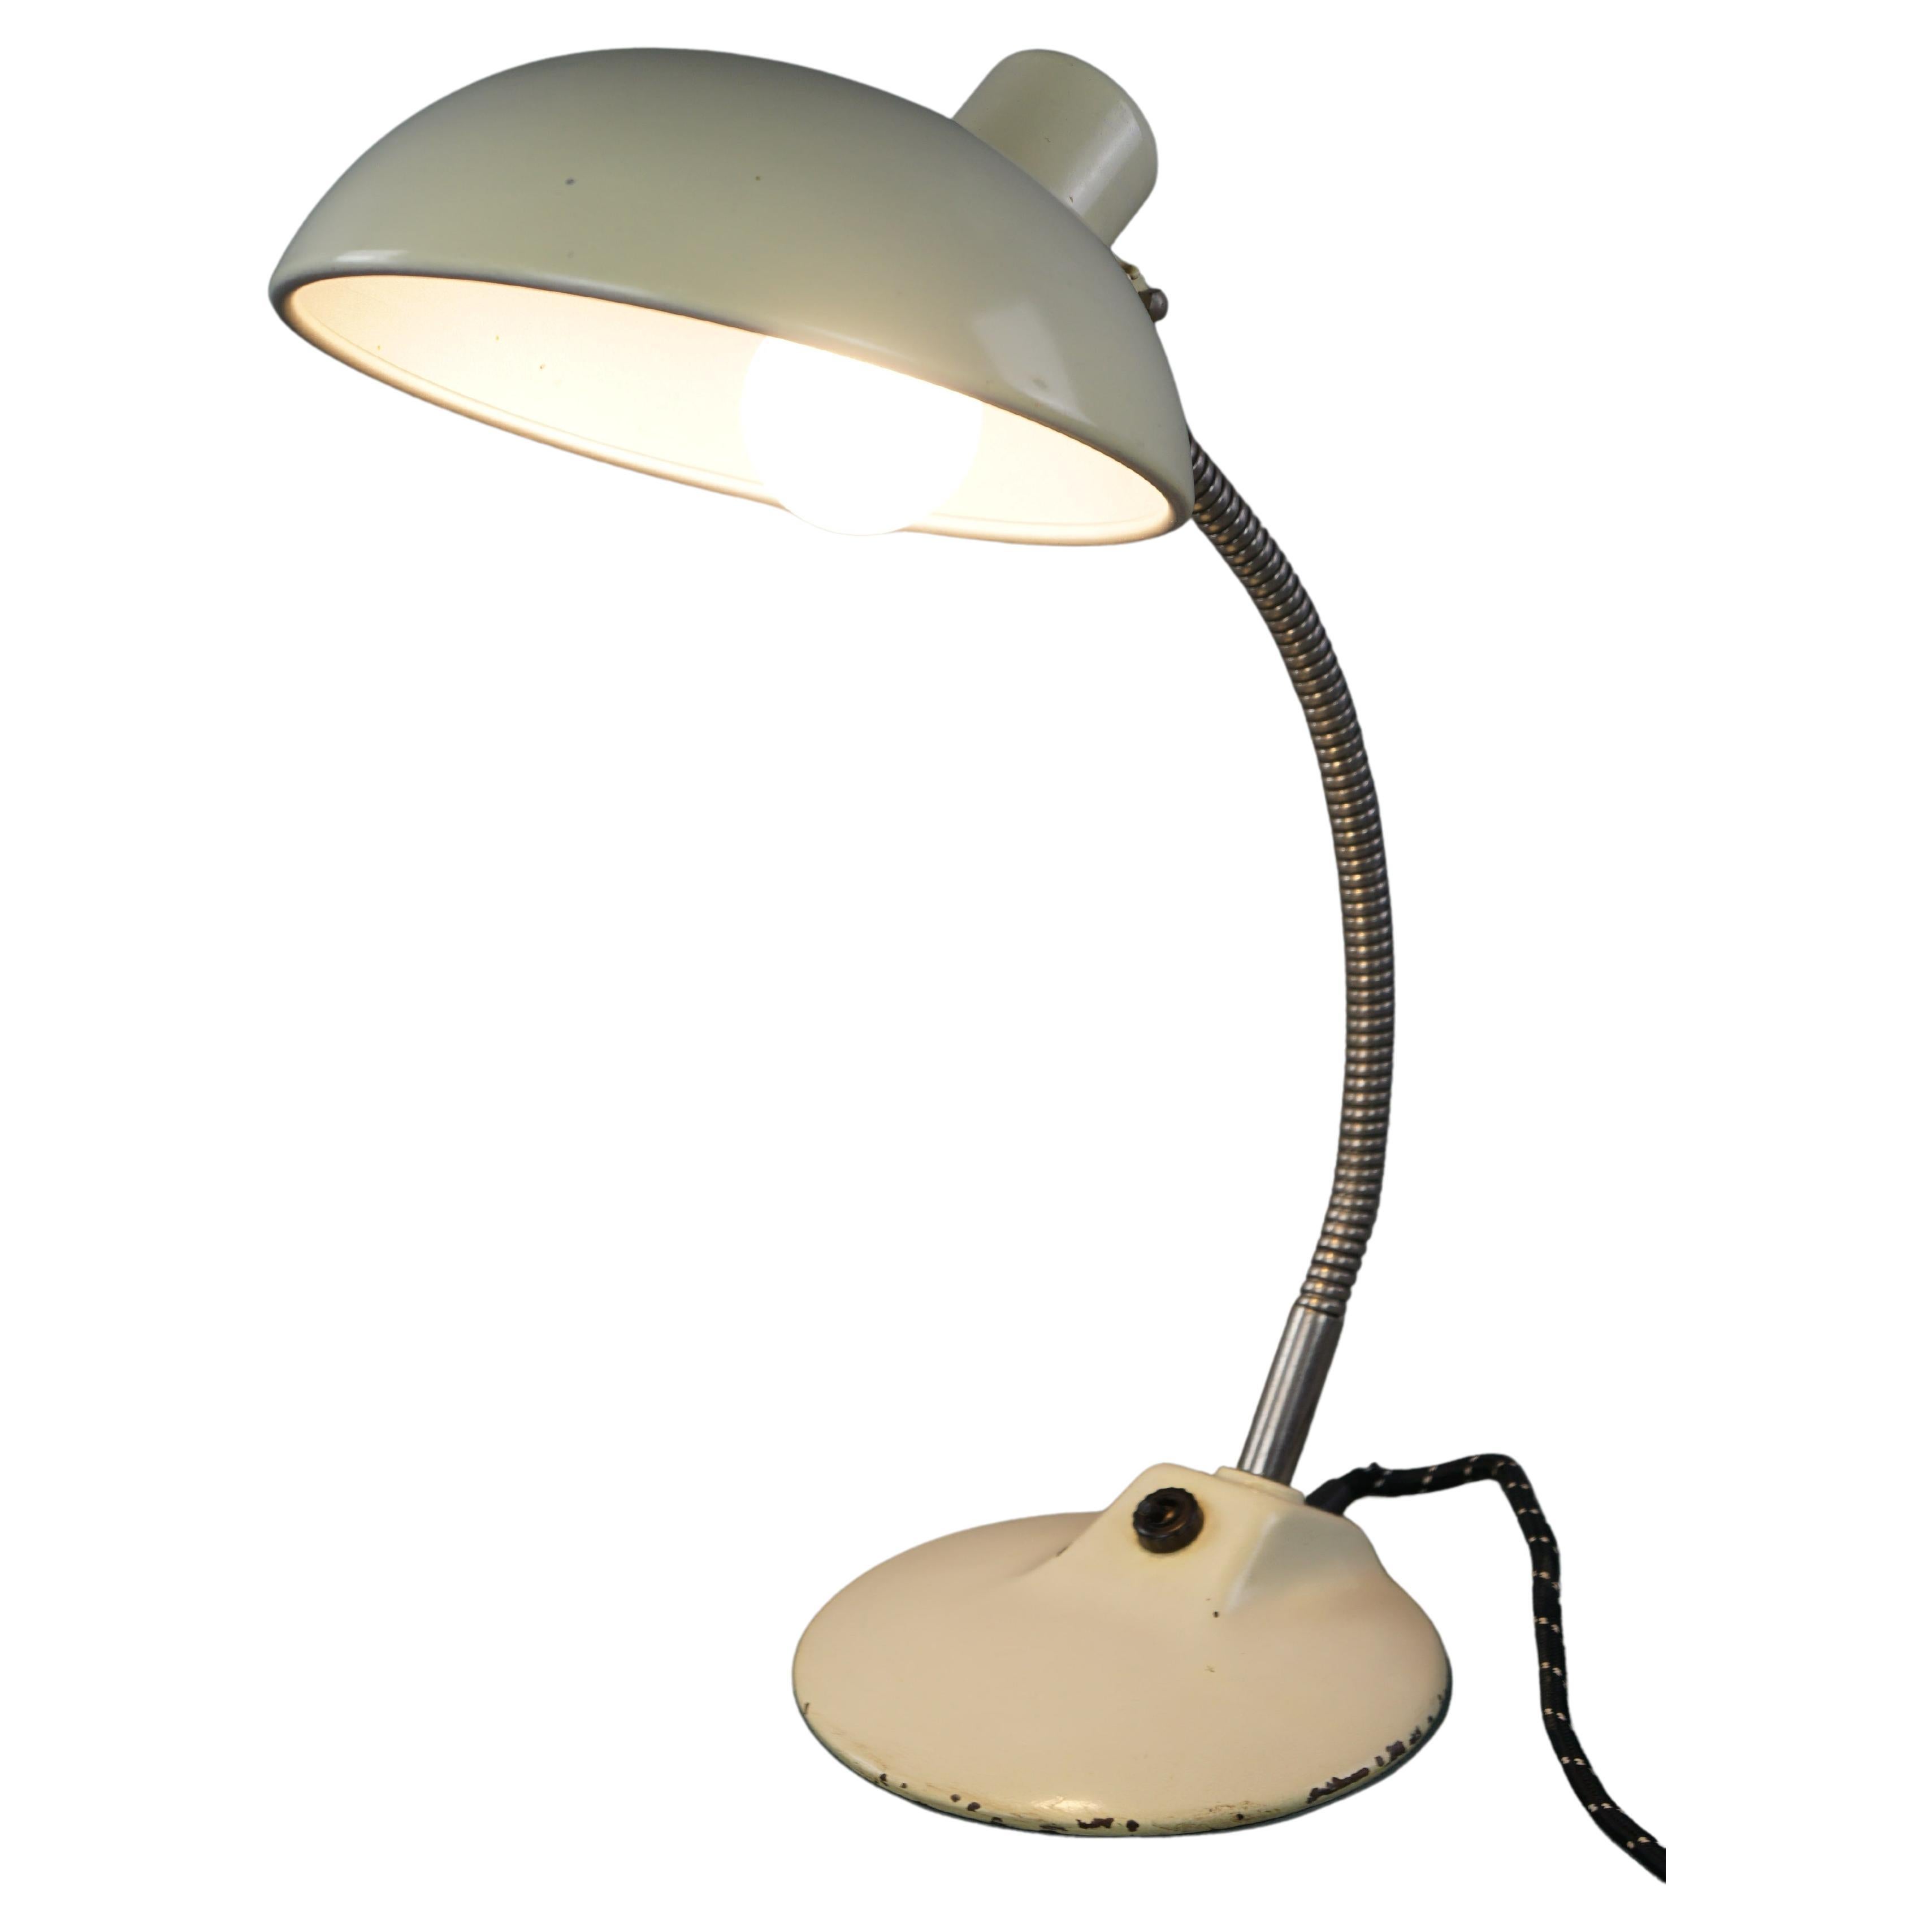 Nice white vintage metal lamp/desk lamp in Bauhaus style from the 1960s